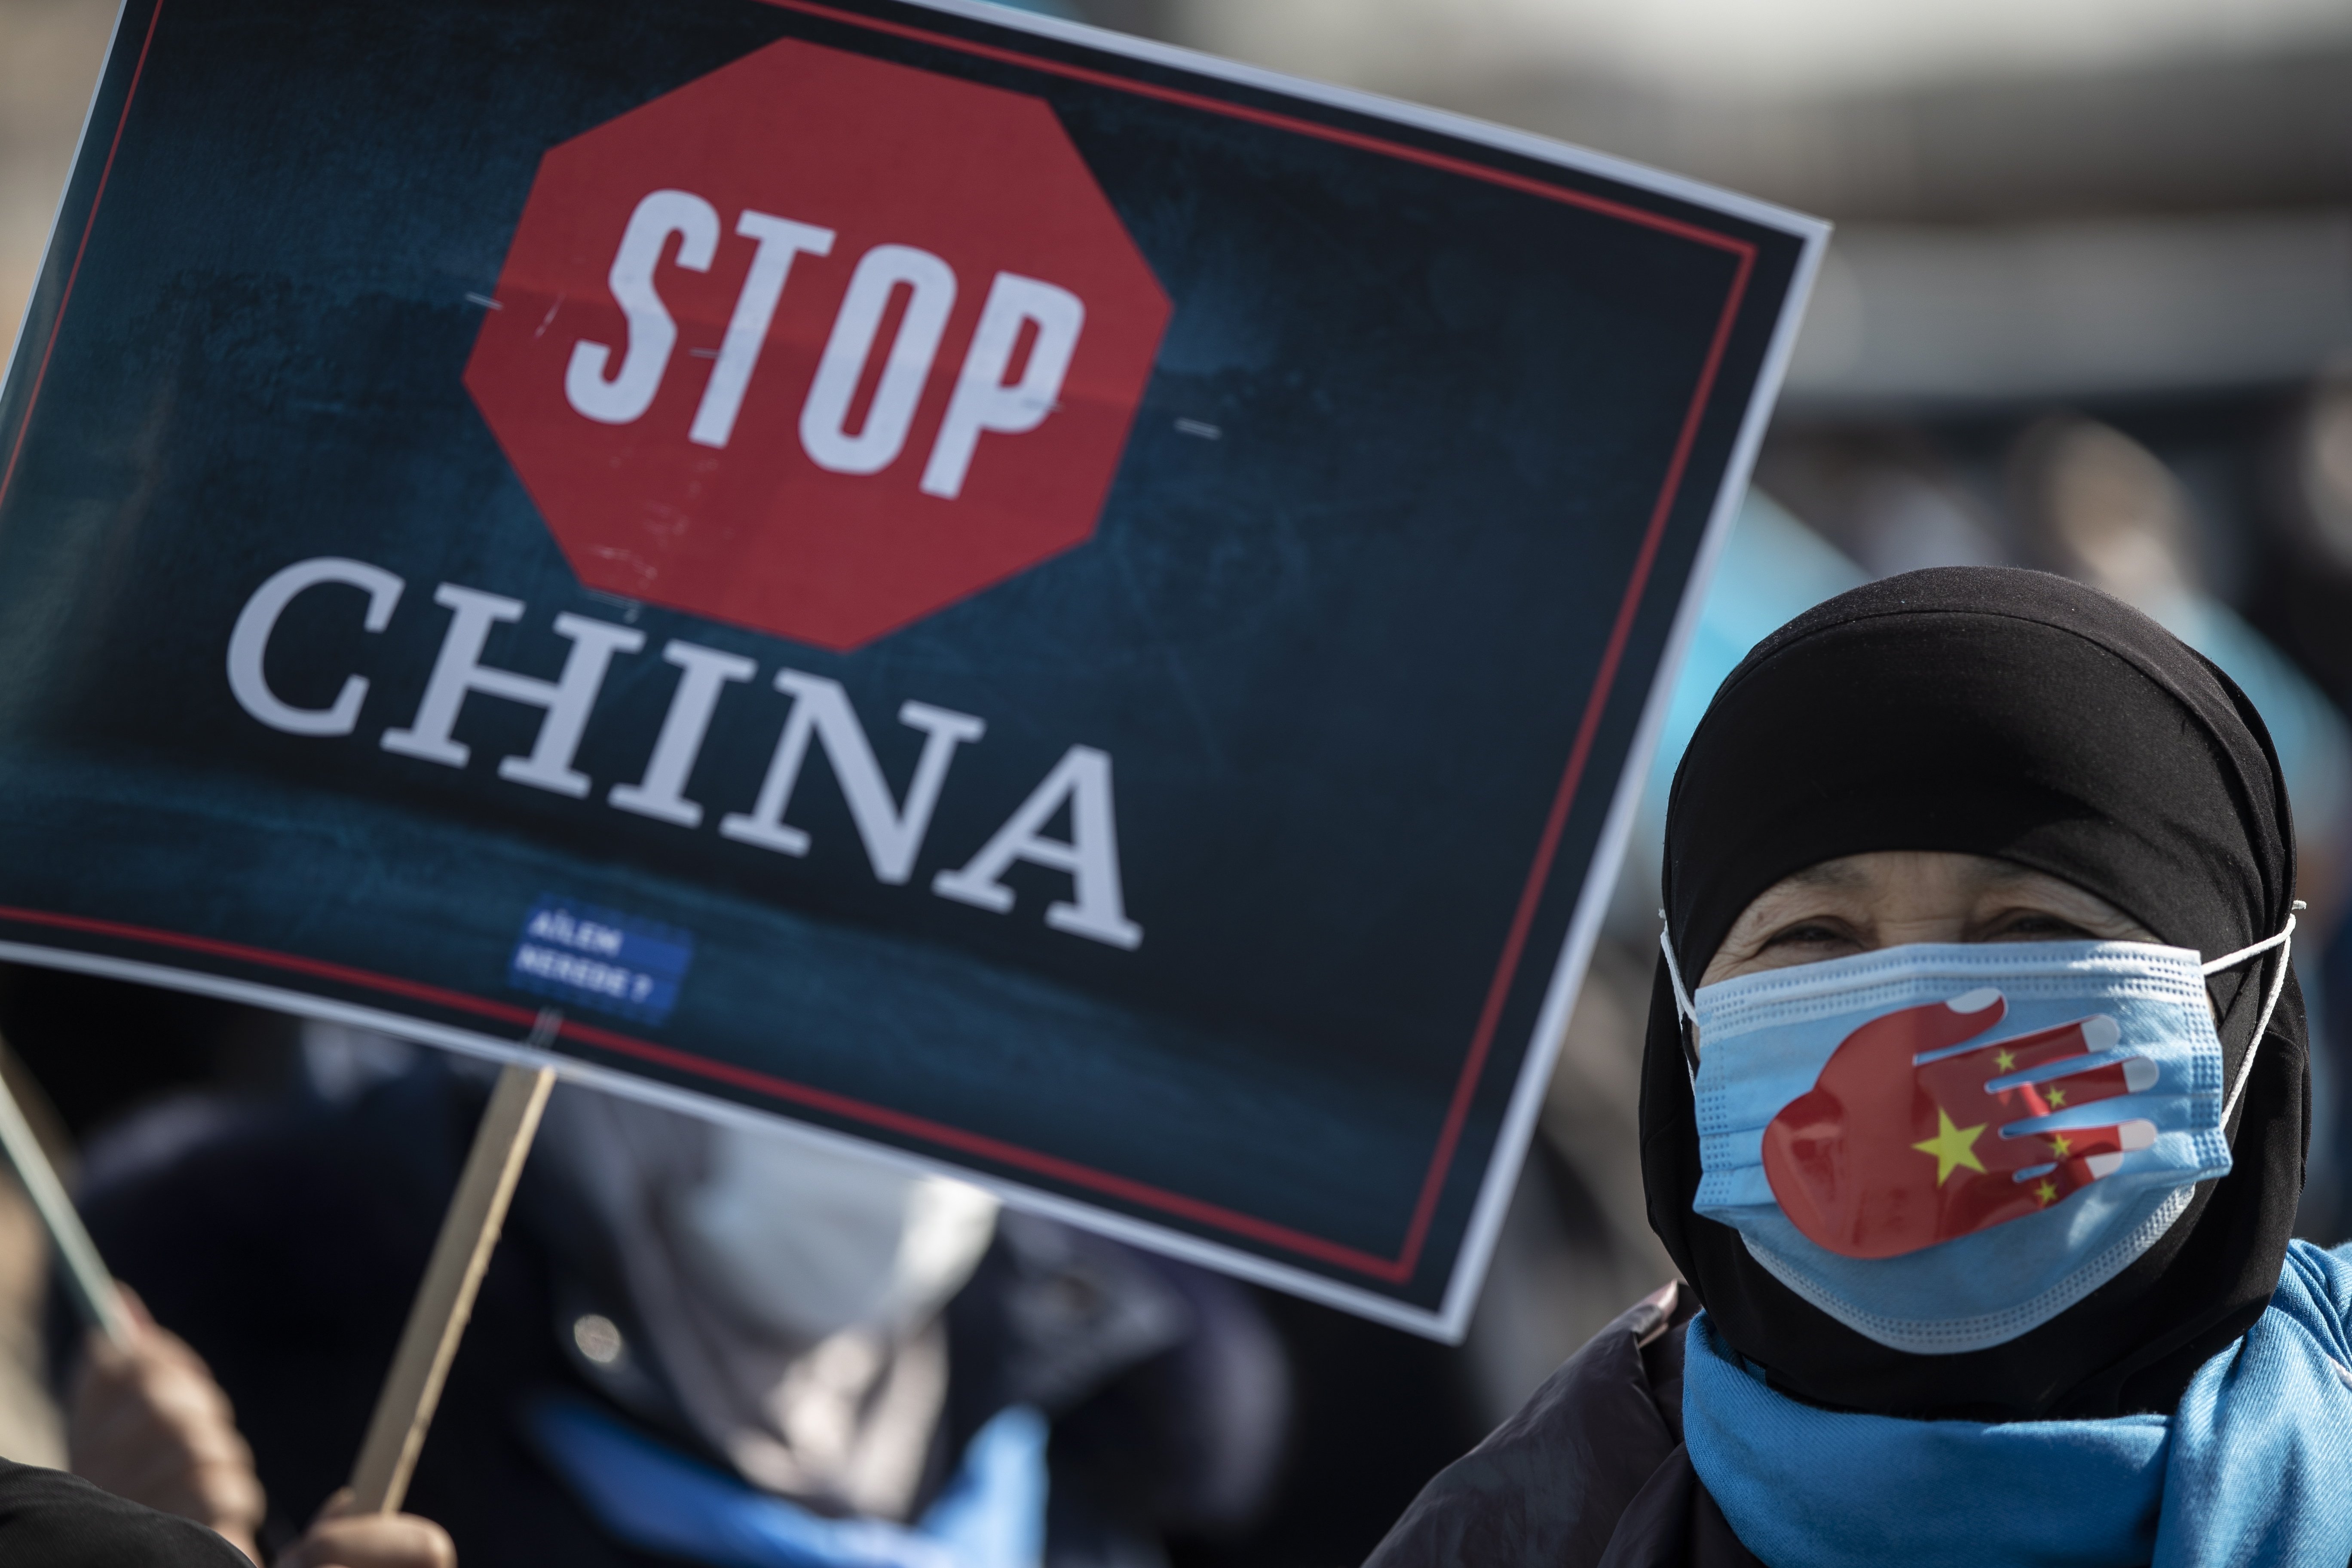 Uyghur protestors who have not heard from their families living in Xinjiang hold placards and the Uyghur flag during a protest against China, in Istanbul, Turkey, Feb. 26, 2021. (EPA Photo)